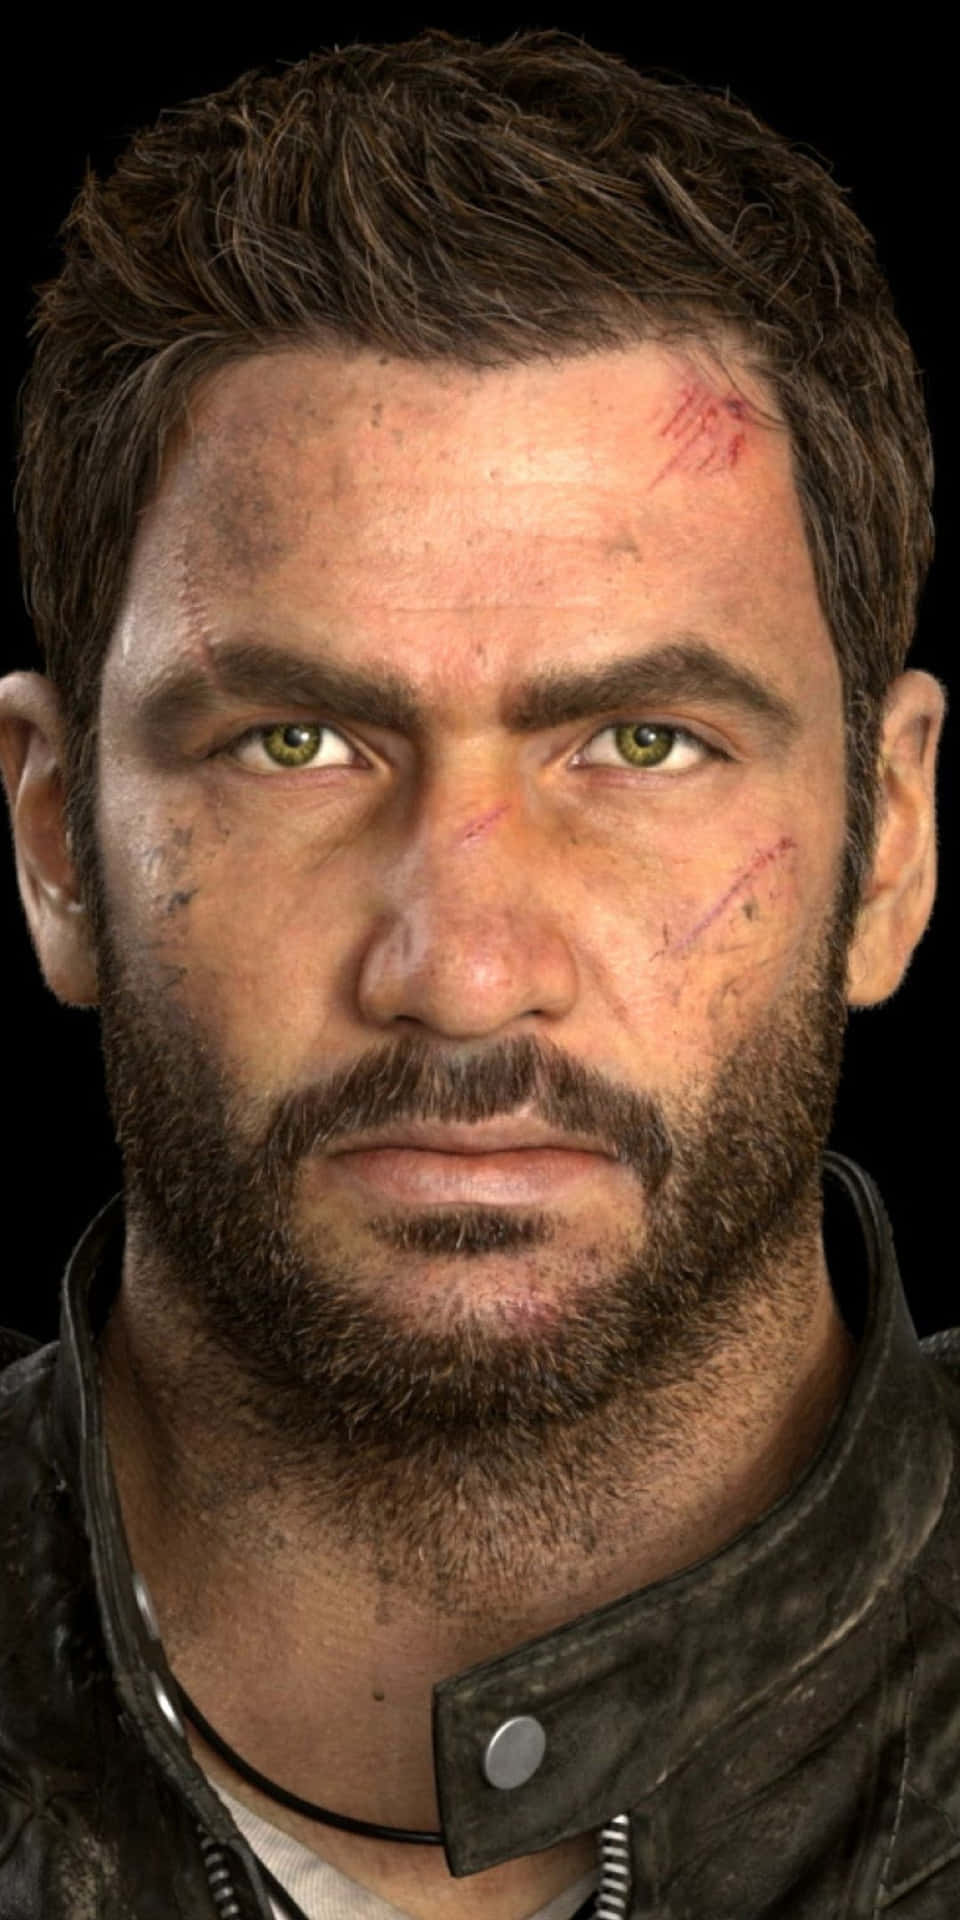 A Man With A Beard And A Scar On His Face